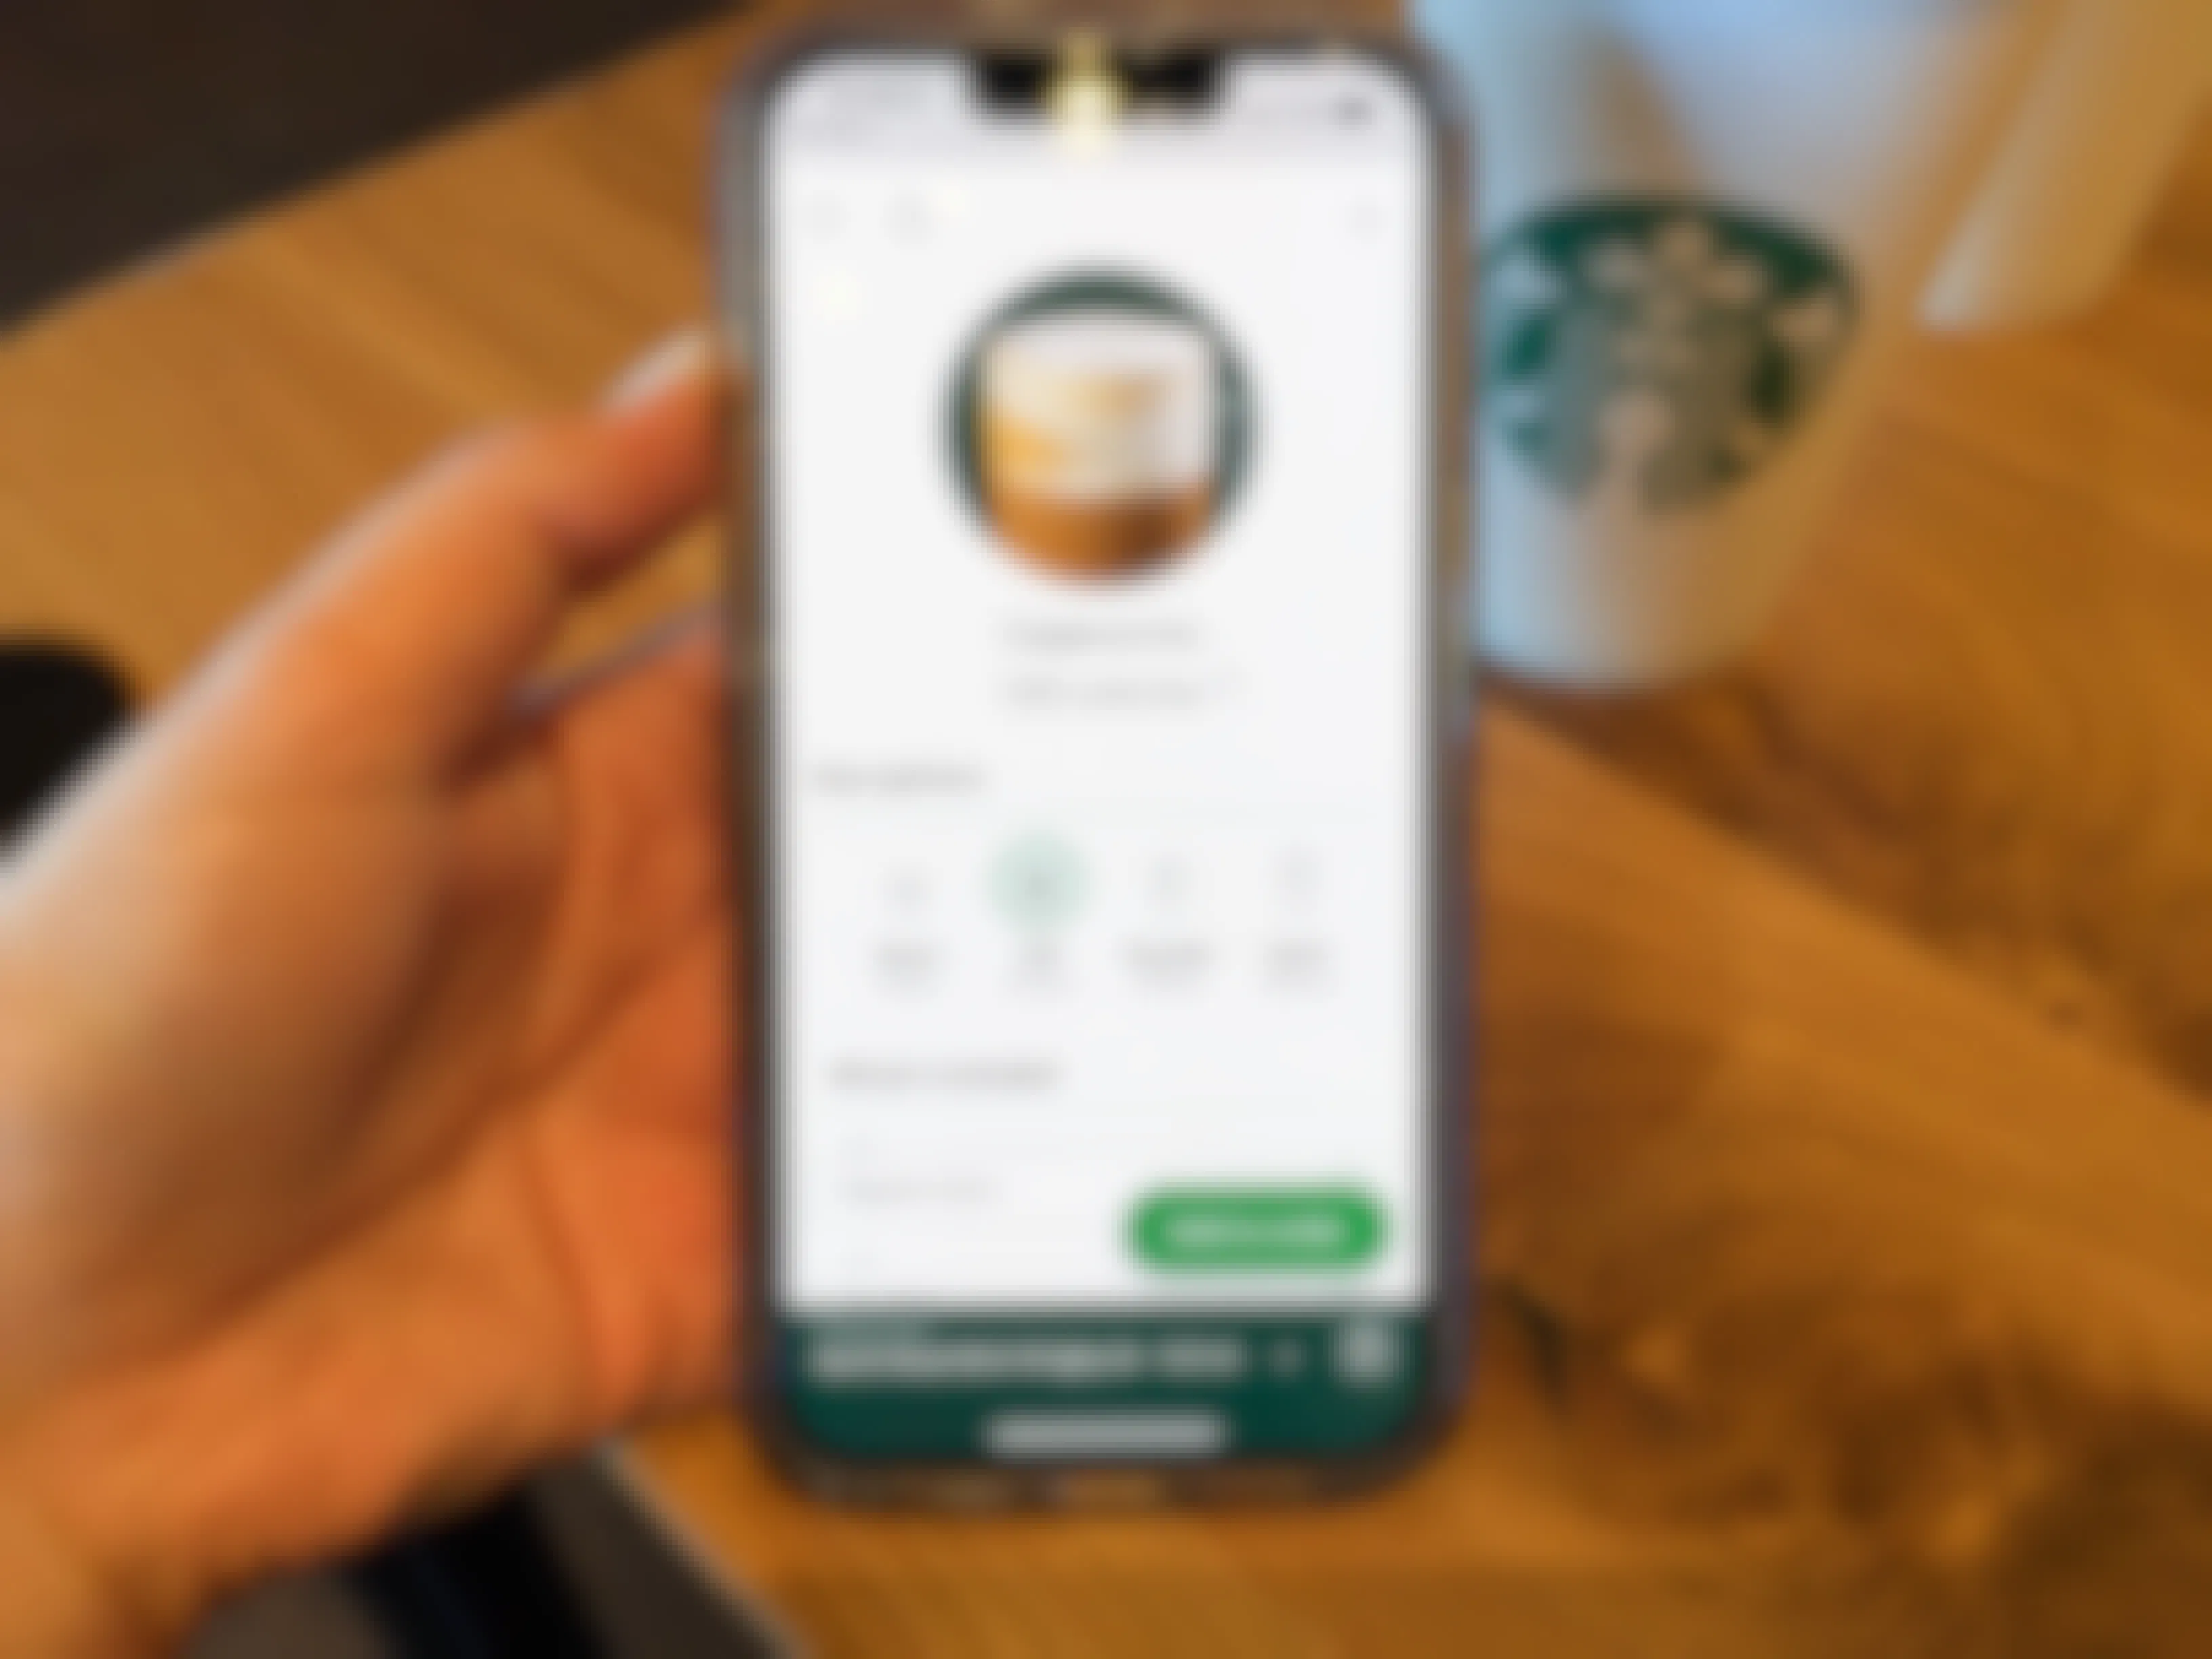 A person's hand holding an iPhone displaying the Starbucks app's page for ordering a Cappuccino next to a Starbucks drink cup on a table.